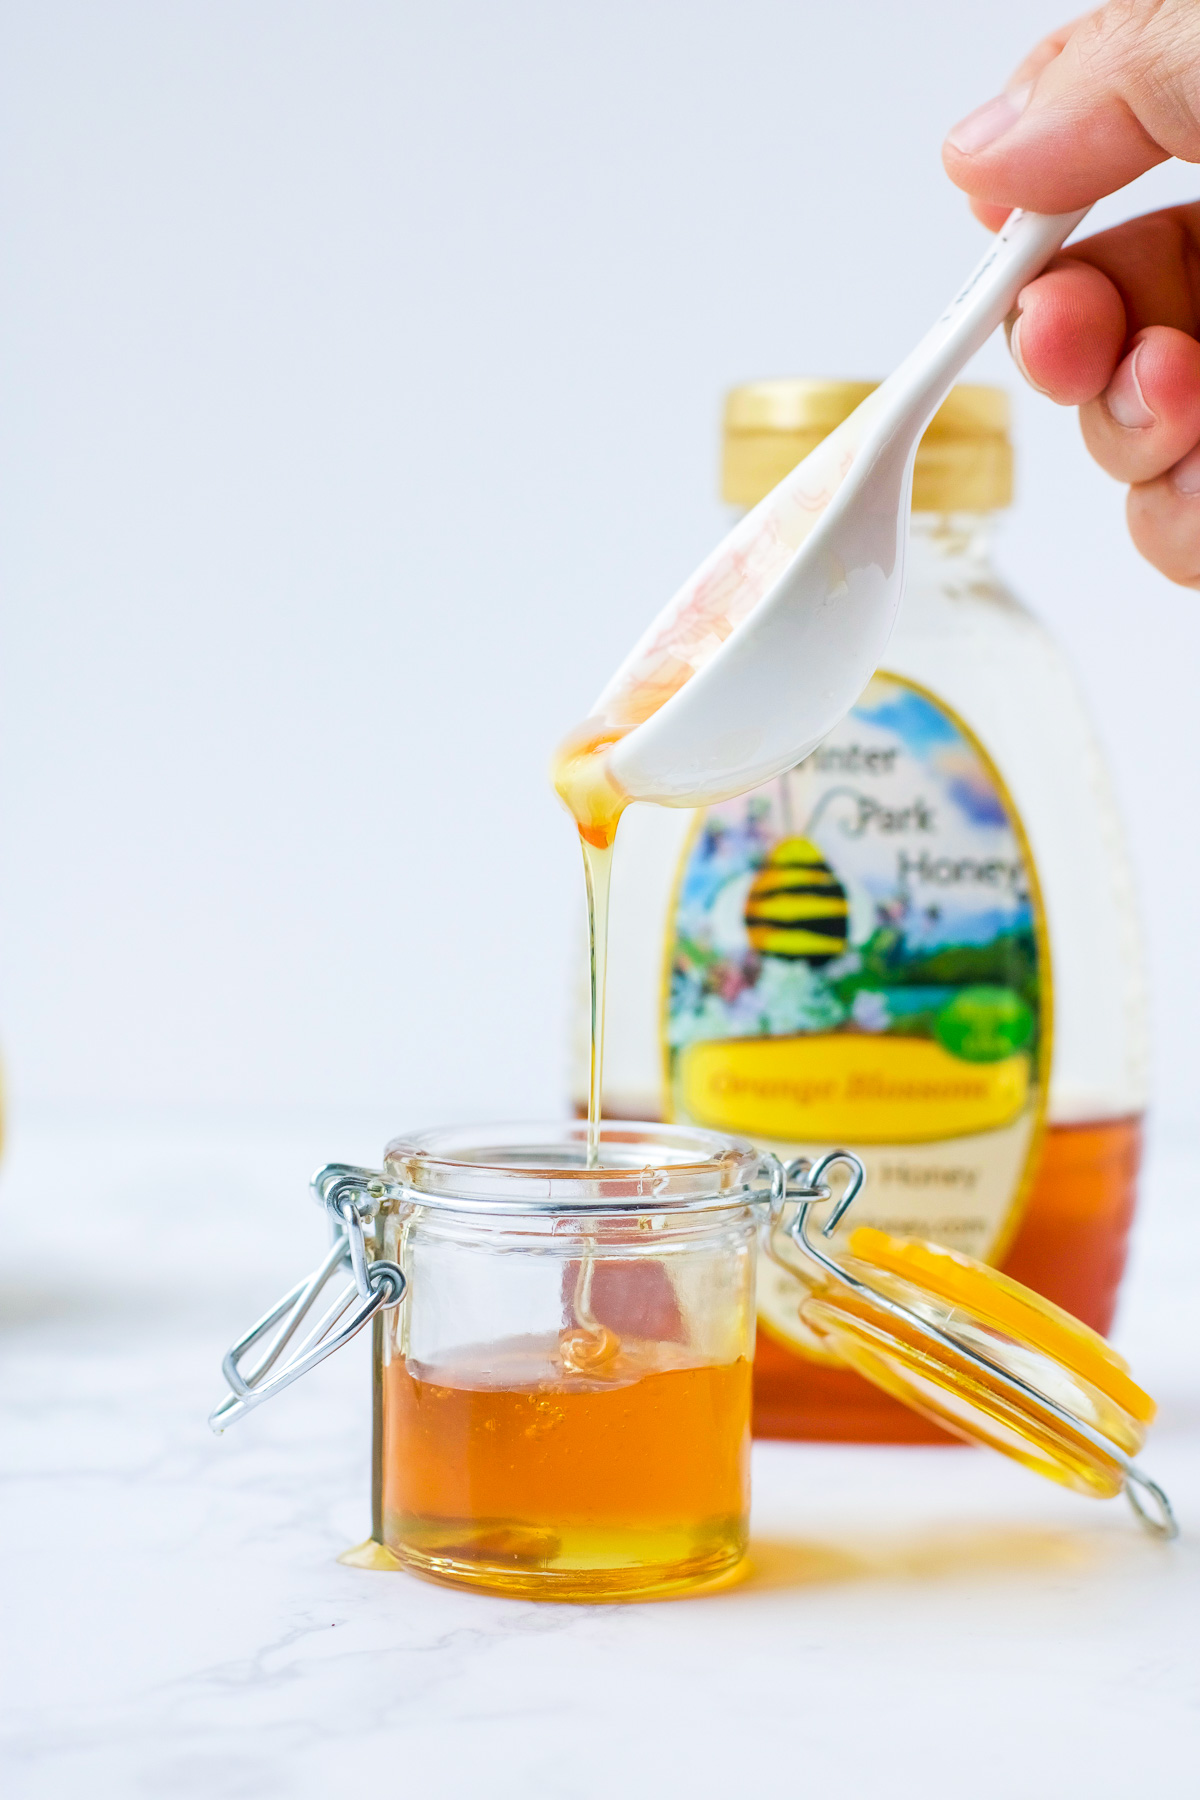 Homemade honey face wash combines antibacterial, anti-inflammatory and natural moisturizing power of honey with essential and nourishing oils.